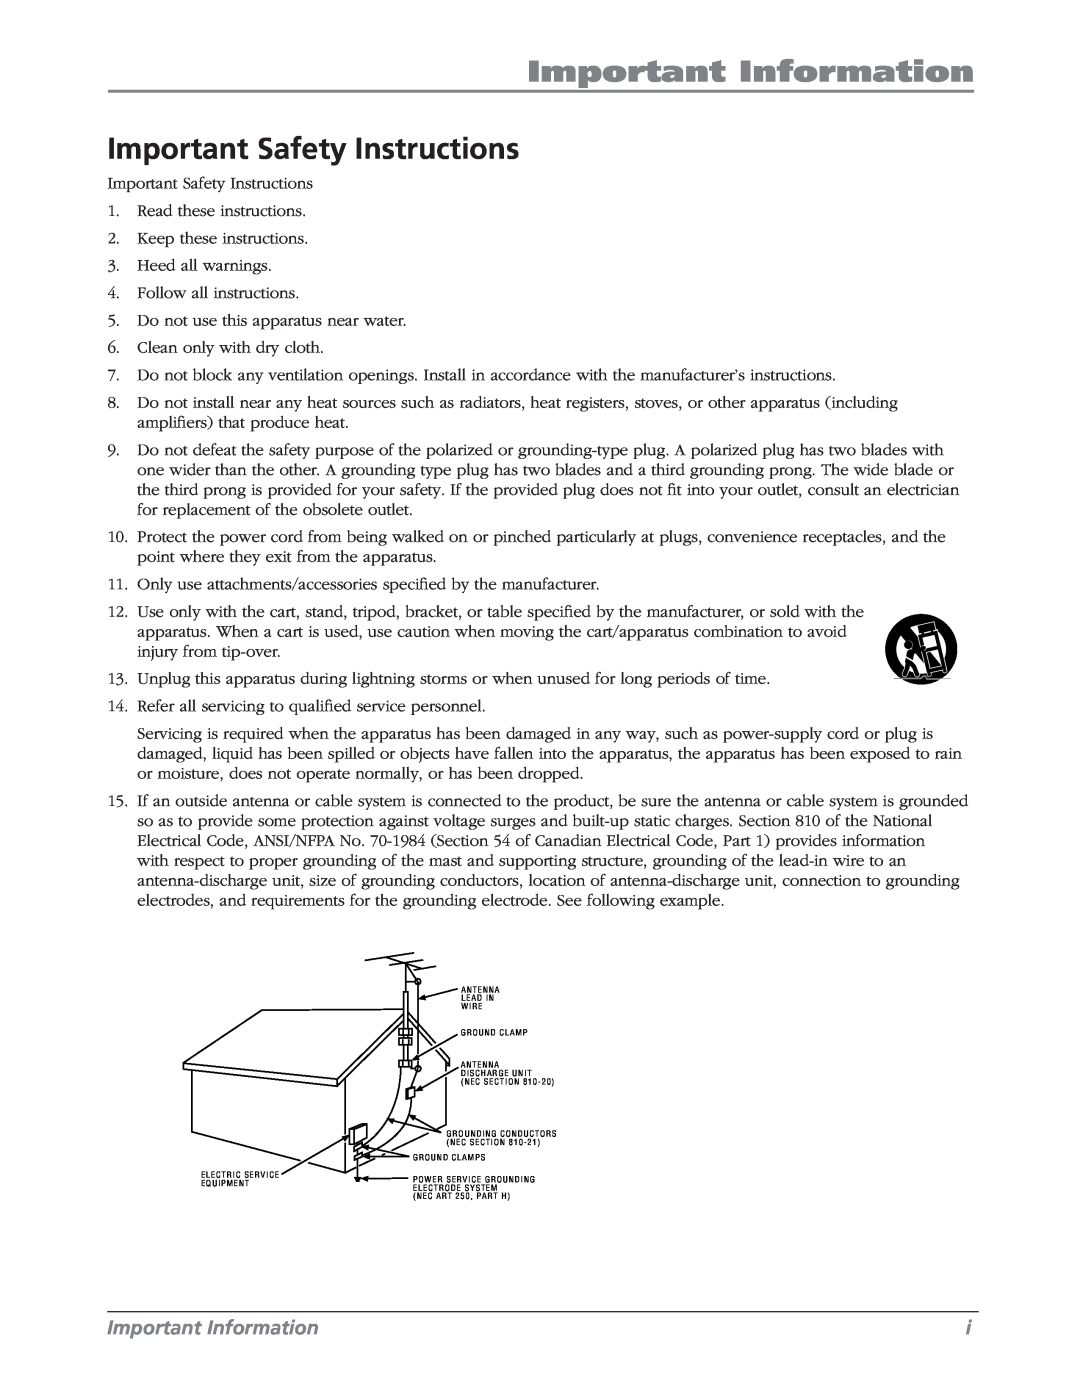 RCA L26WD26D warranty Important Safety Instructions, Important Information 